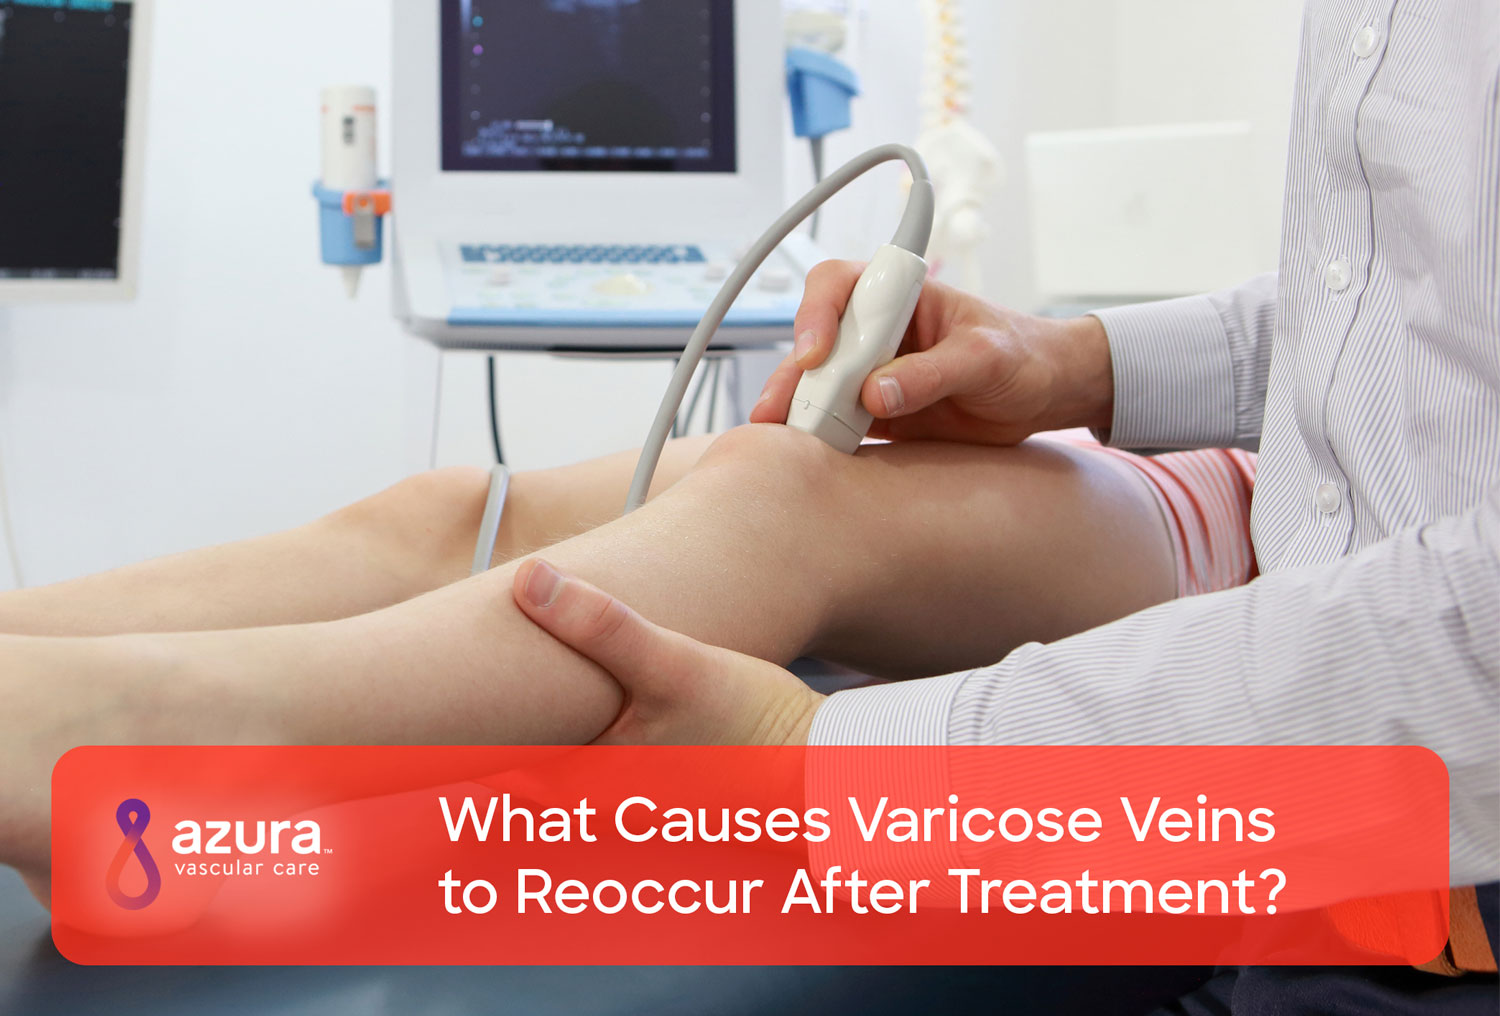 What Would Cause Varicose Veins to Reoccur After Treatment?